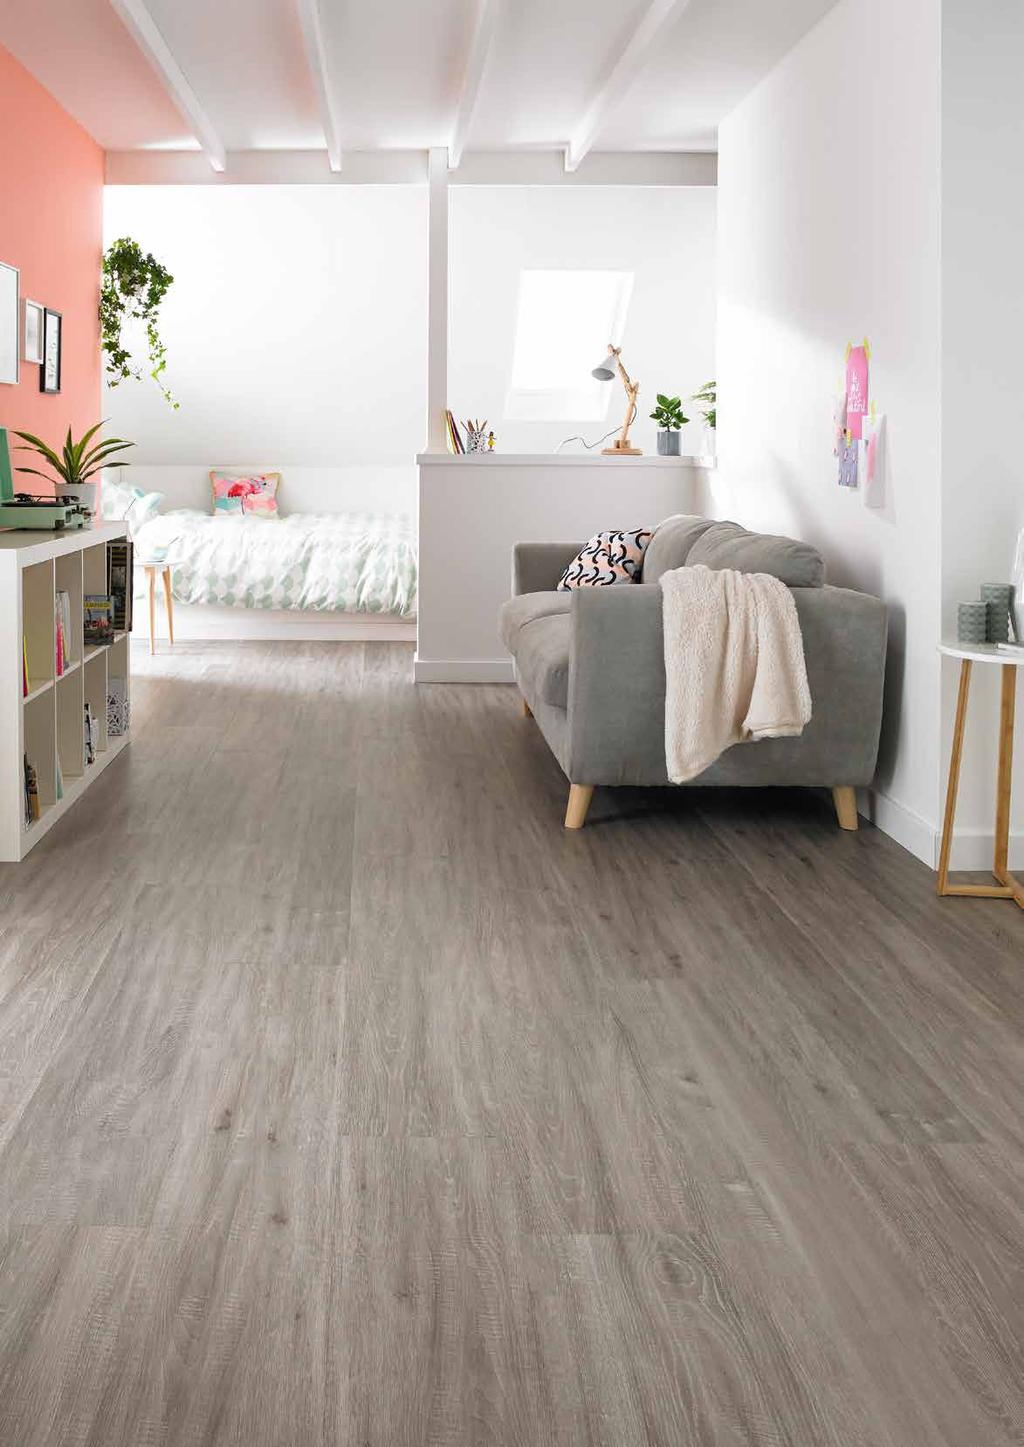 French Grey Oak s light overall tone sets a neutral backdrop for a contemporary interior.